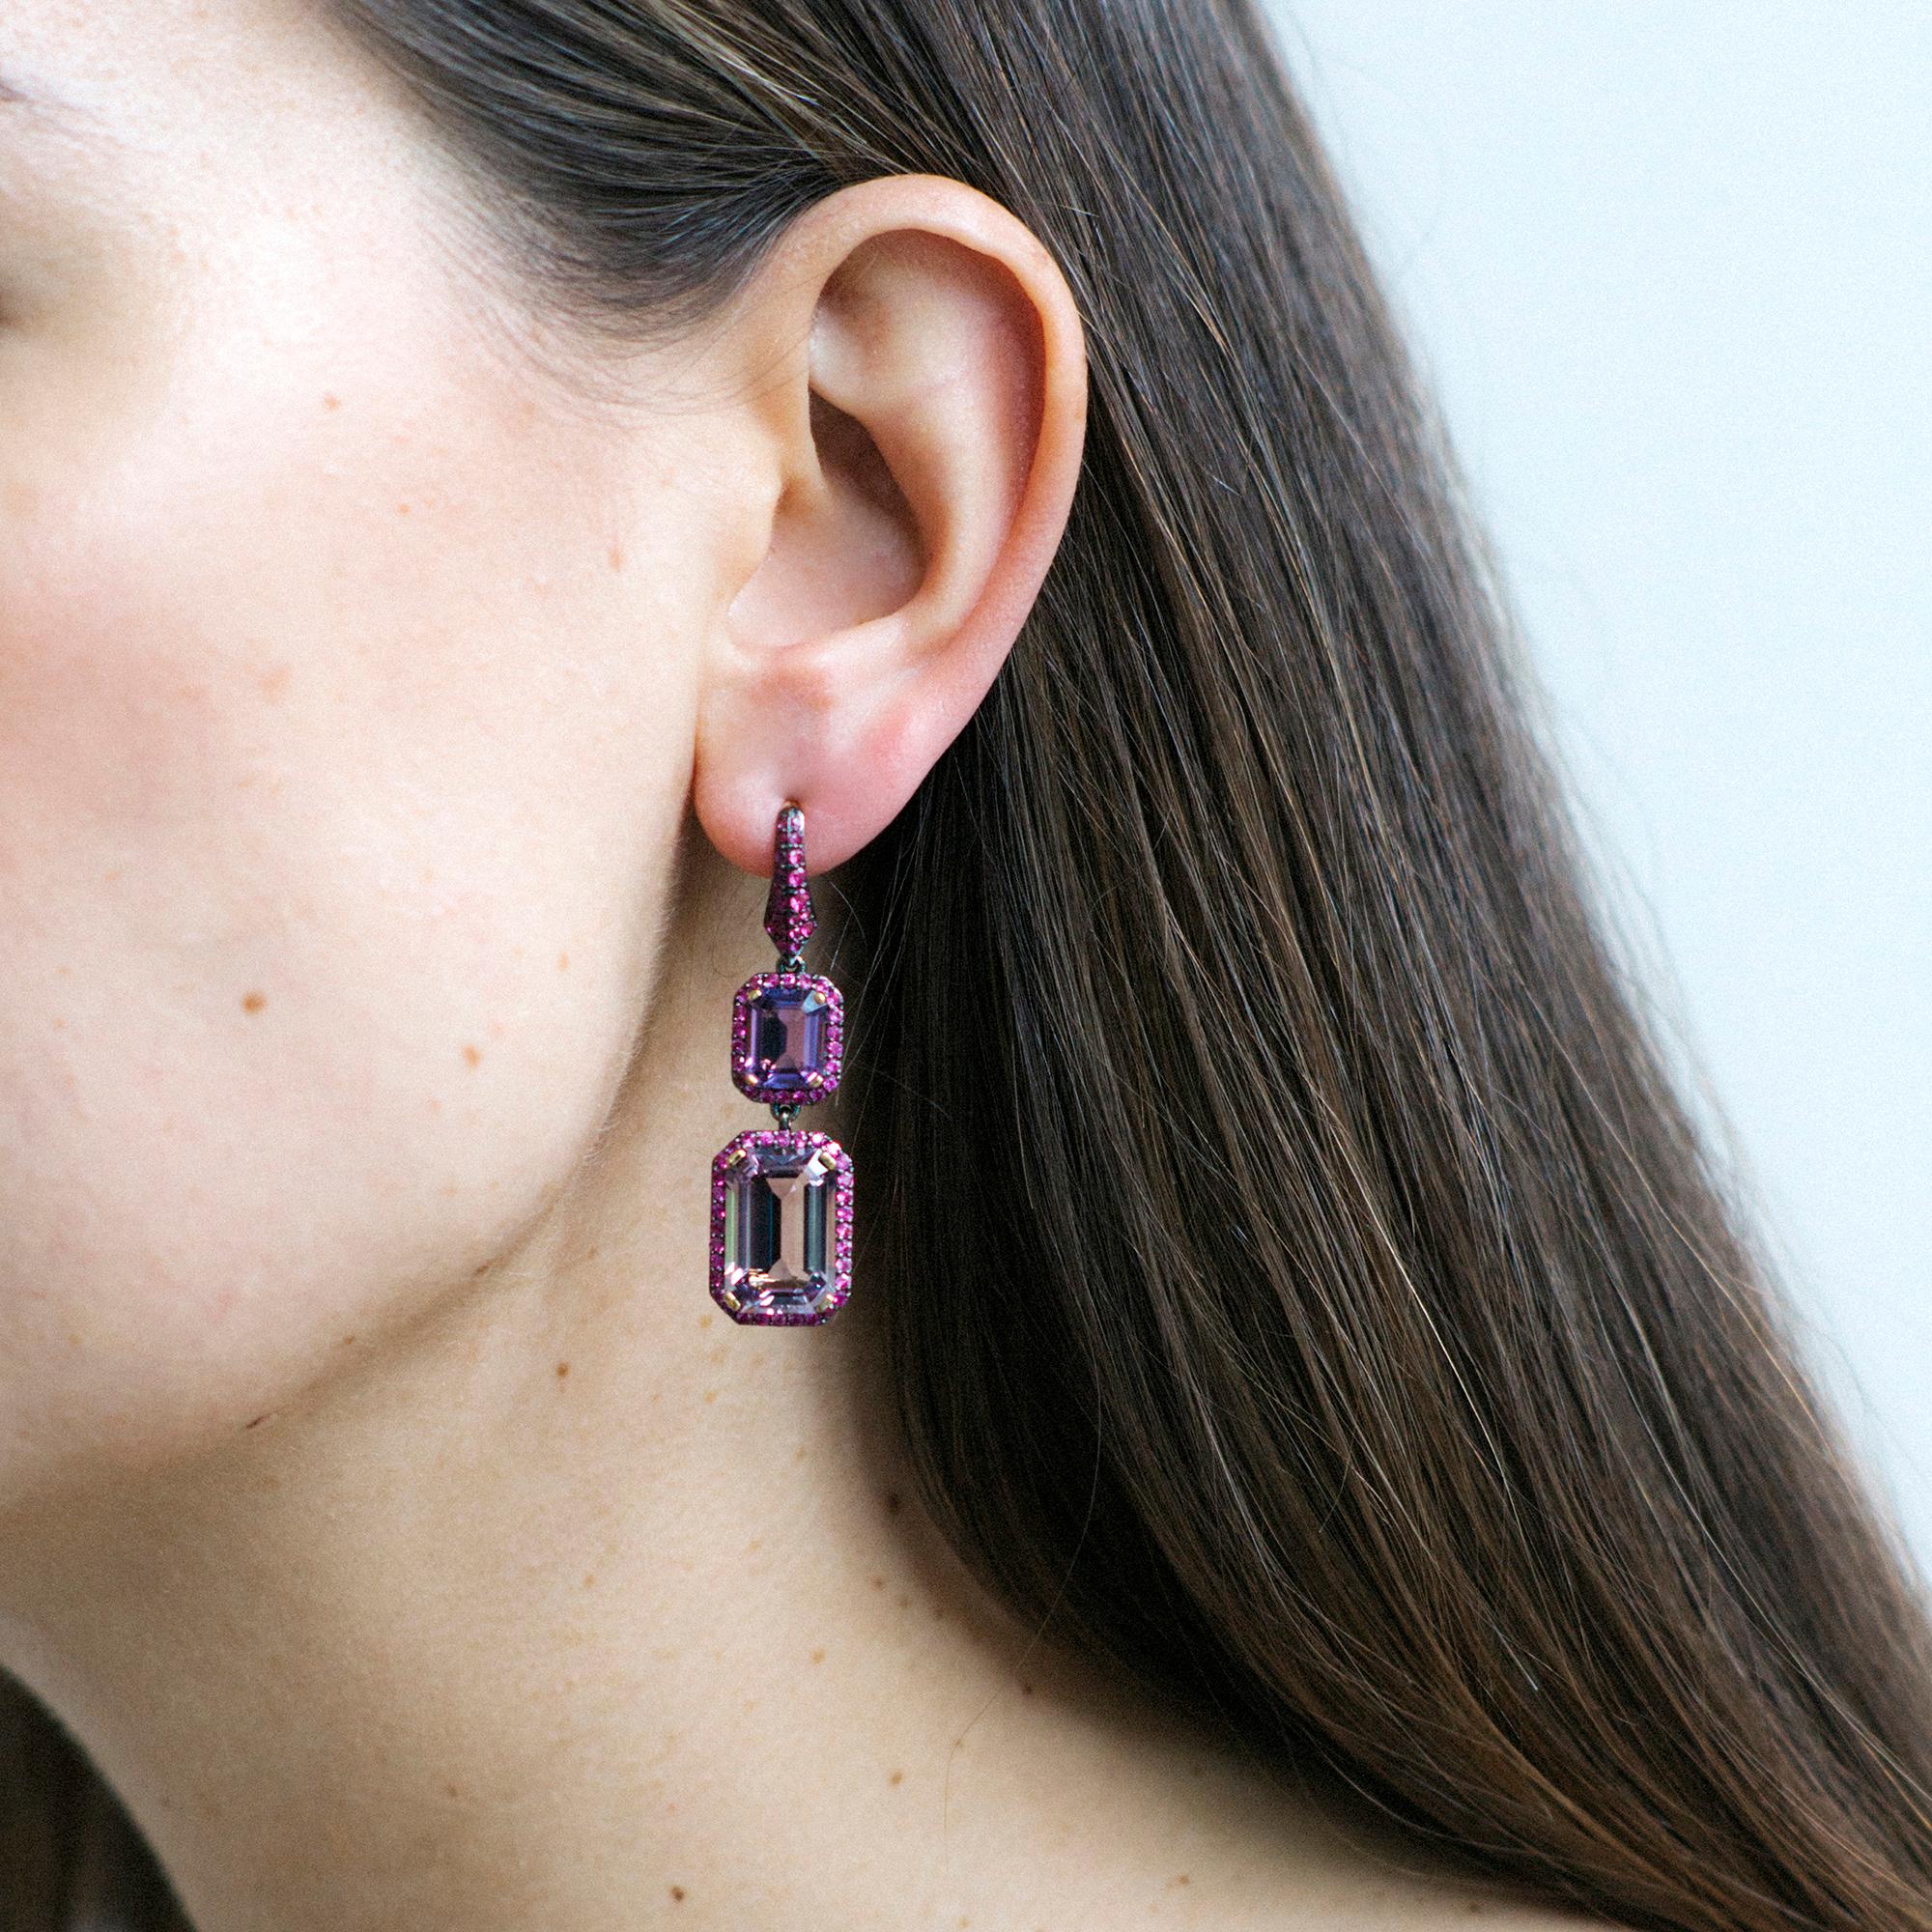 Emerald Cut Amethyst, Lavender and Pink Sapphire Earrings in 18K Yellow Gold and Light Black Rhodium, from 'Rain Forest' Collection

Stone Size: 9 x 7 mm & 10 x 15 mm

Gemstone Approx Wt  Amethyst - 3.92 Carats. 
                                    